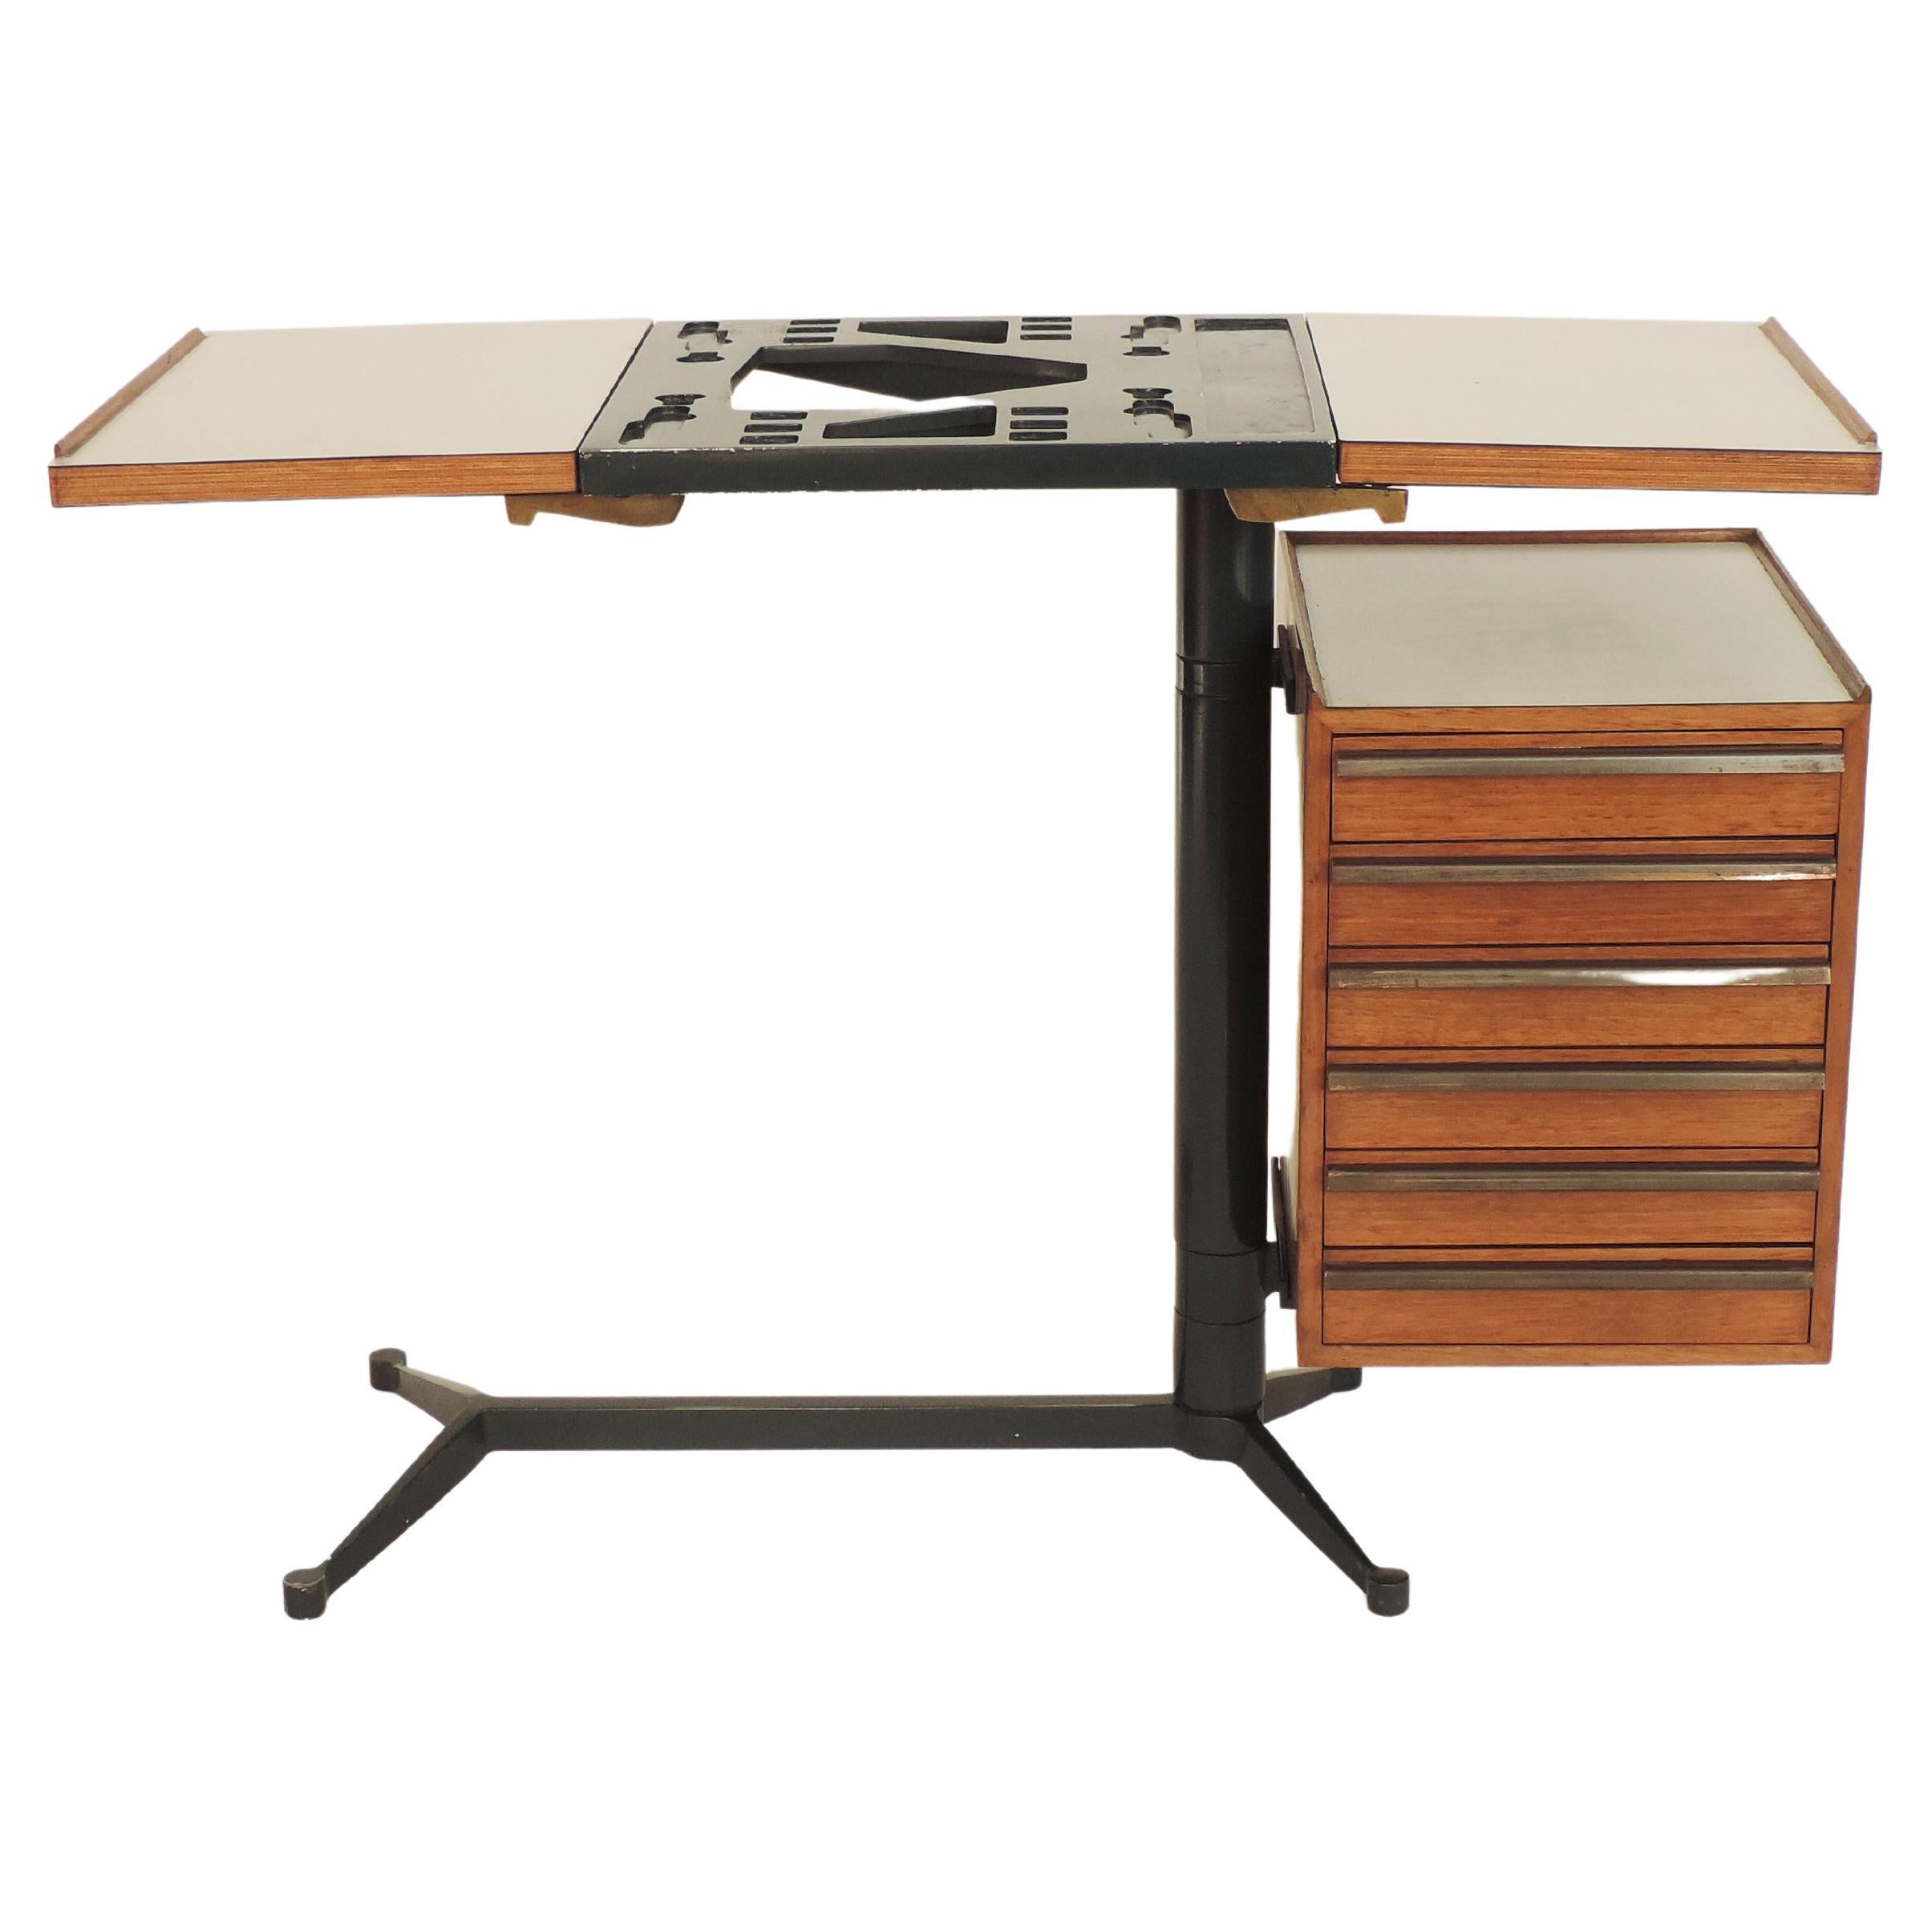 Studio BBPR Small adjustable work desk and typewriter station made for the Olivetti store in New York, 1954
This was designed by Studio BBPR for the newly built flagship store in New York to be then offered to the public in Italy. ( which probably